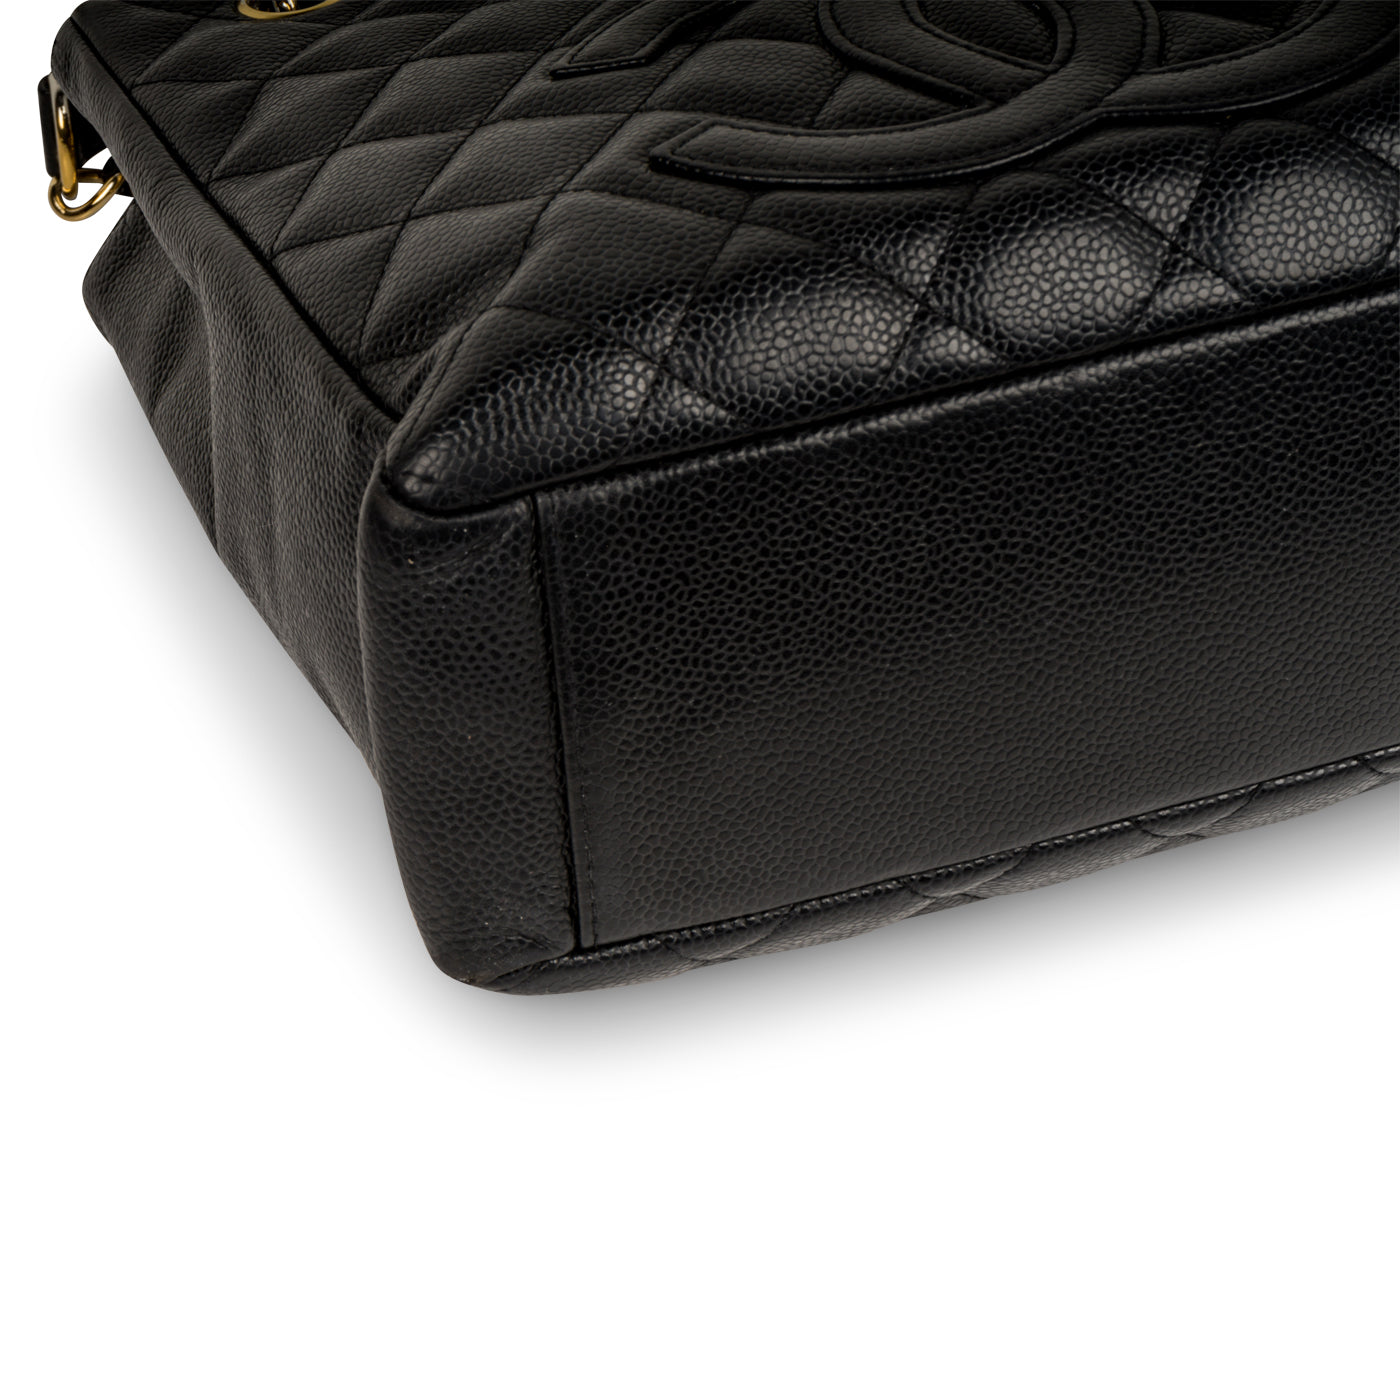 Chanel PST (Petite Shopping Tote) – The Brand Collector